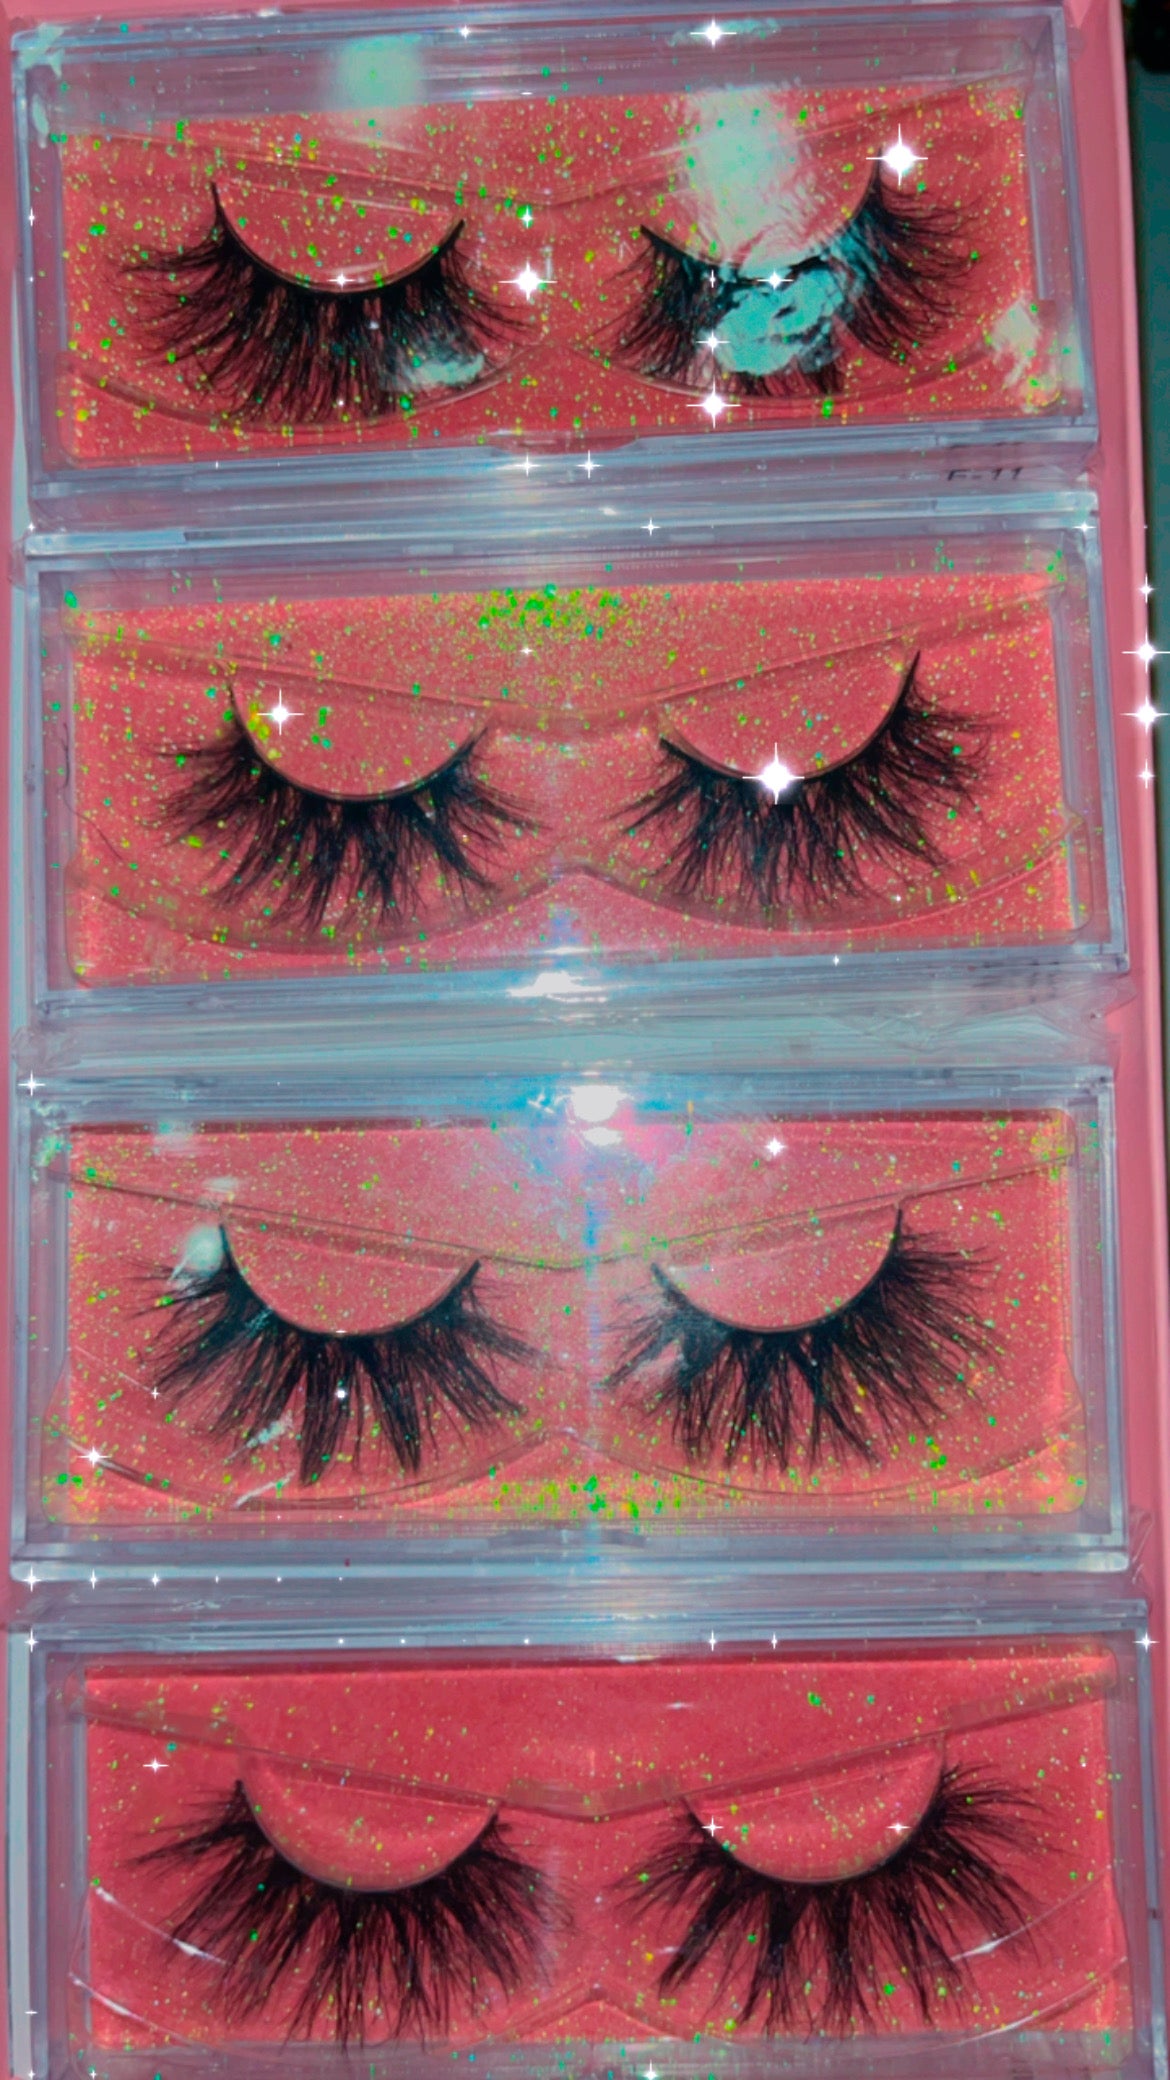 20mm Mink Lashes